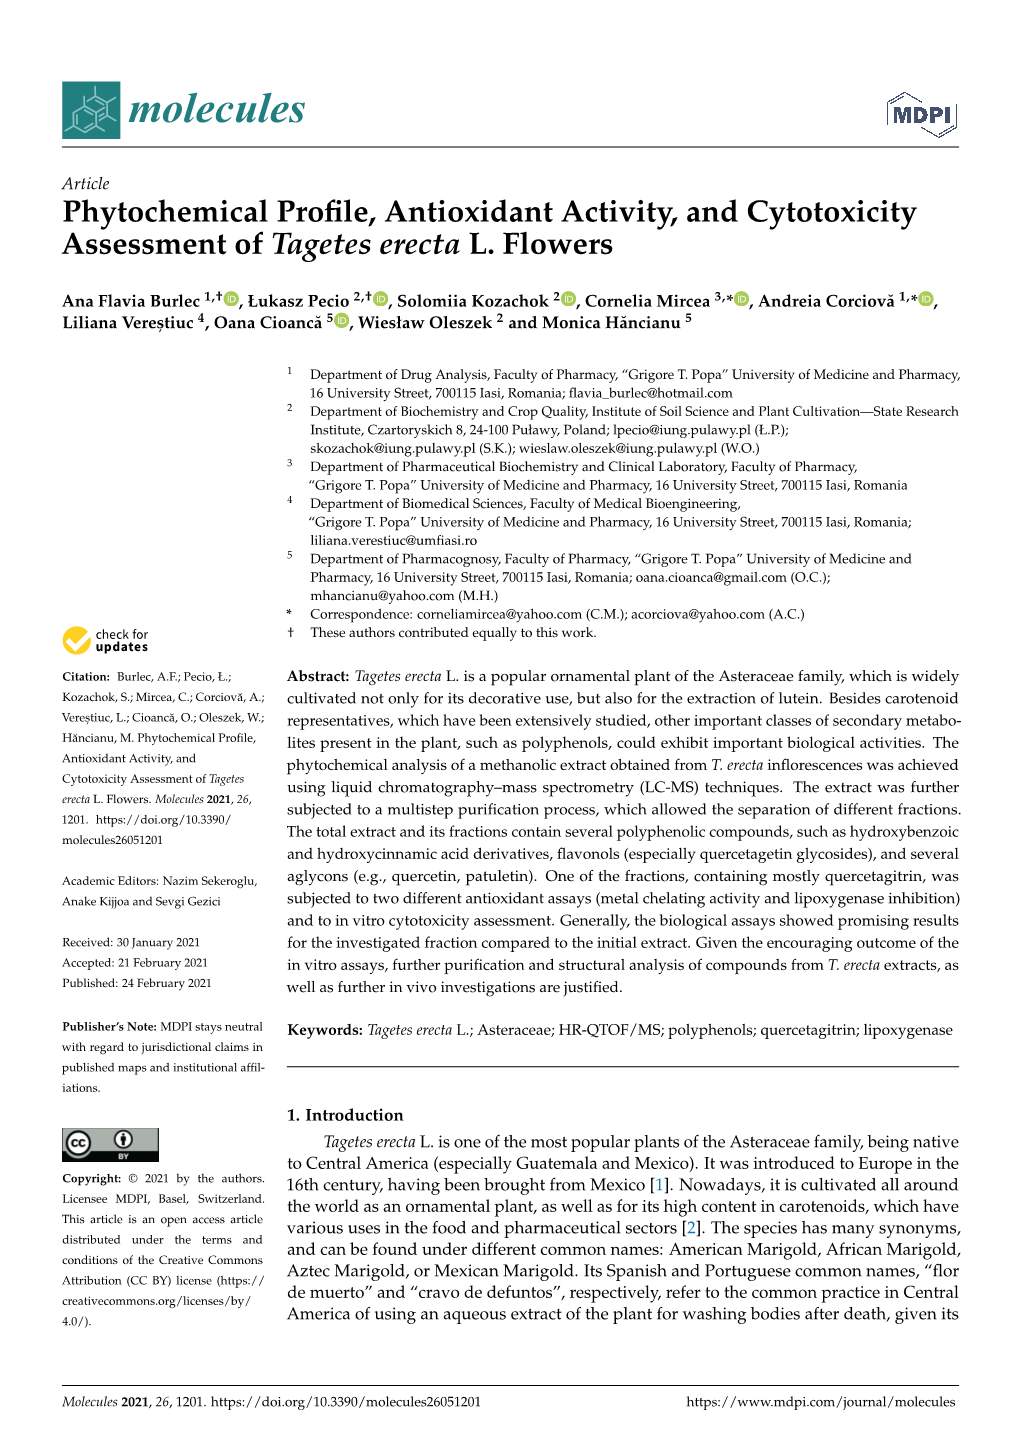 Phytochemical Profile, Antioxidant Activity, and Cytotoxicity Assessment of Tagetes Erecta L. Flowers